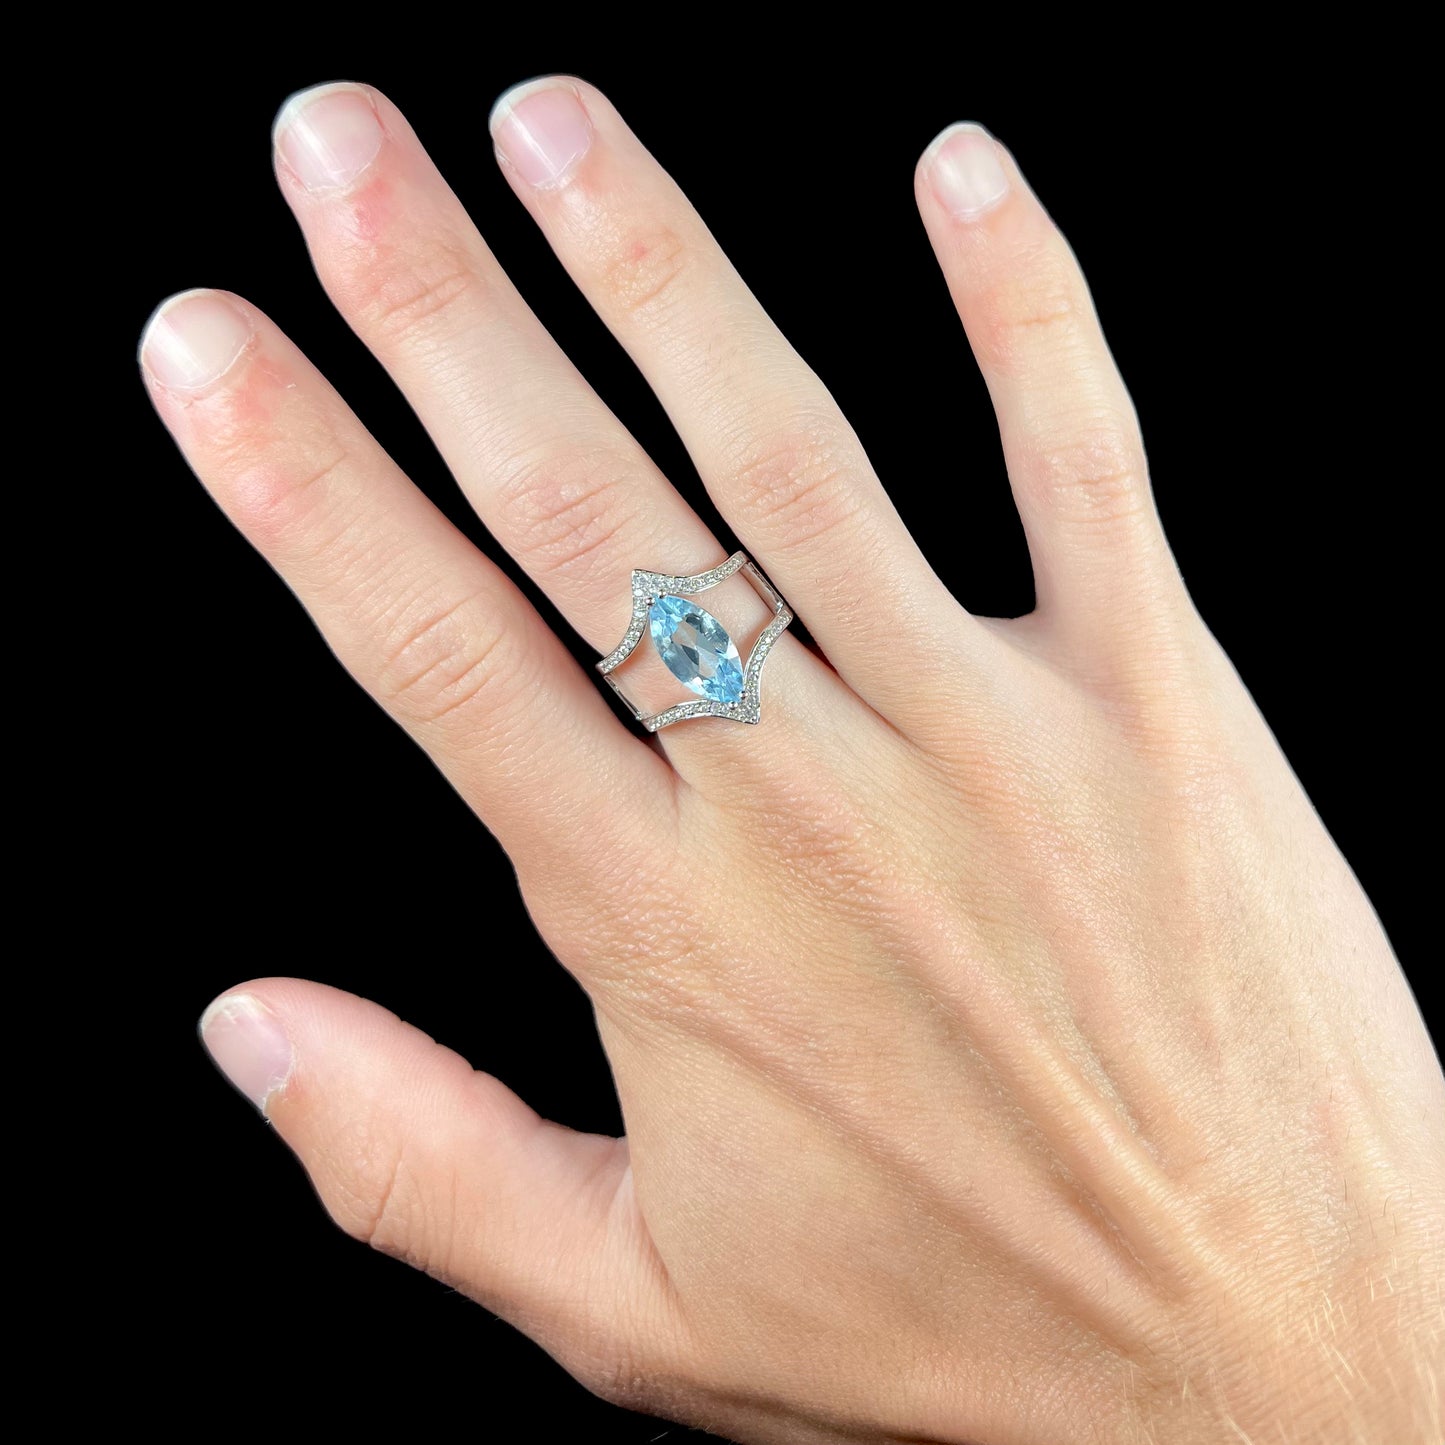 A ladies' marquise cut blue topaz and cubic zirconia accented ring cast in sterling silver.